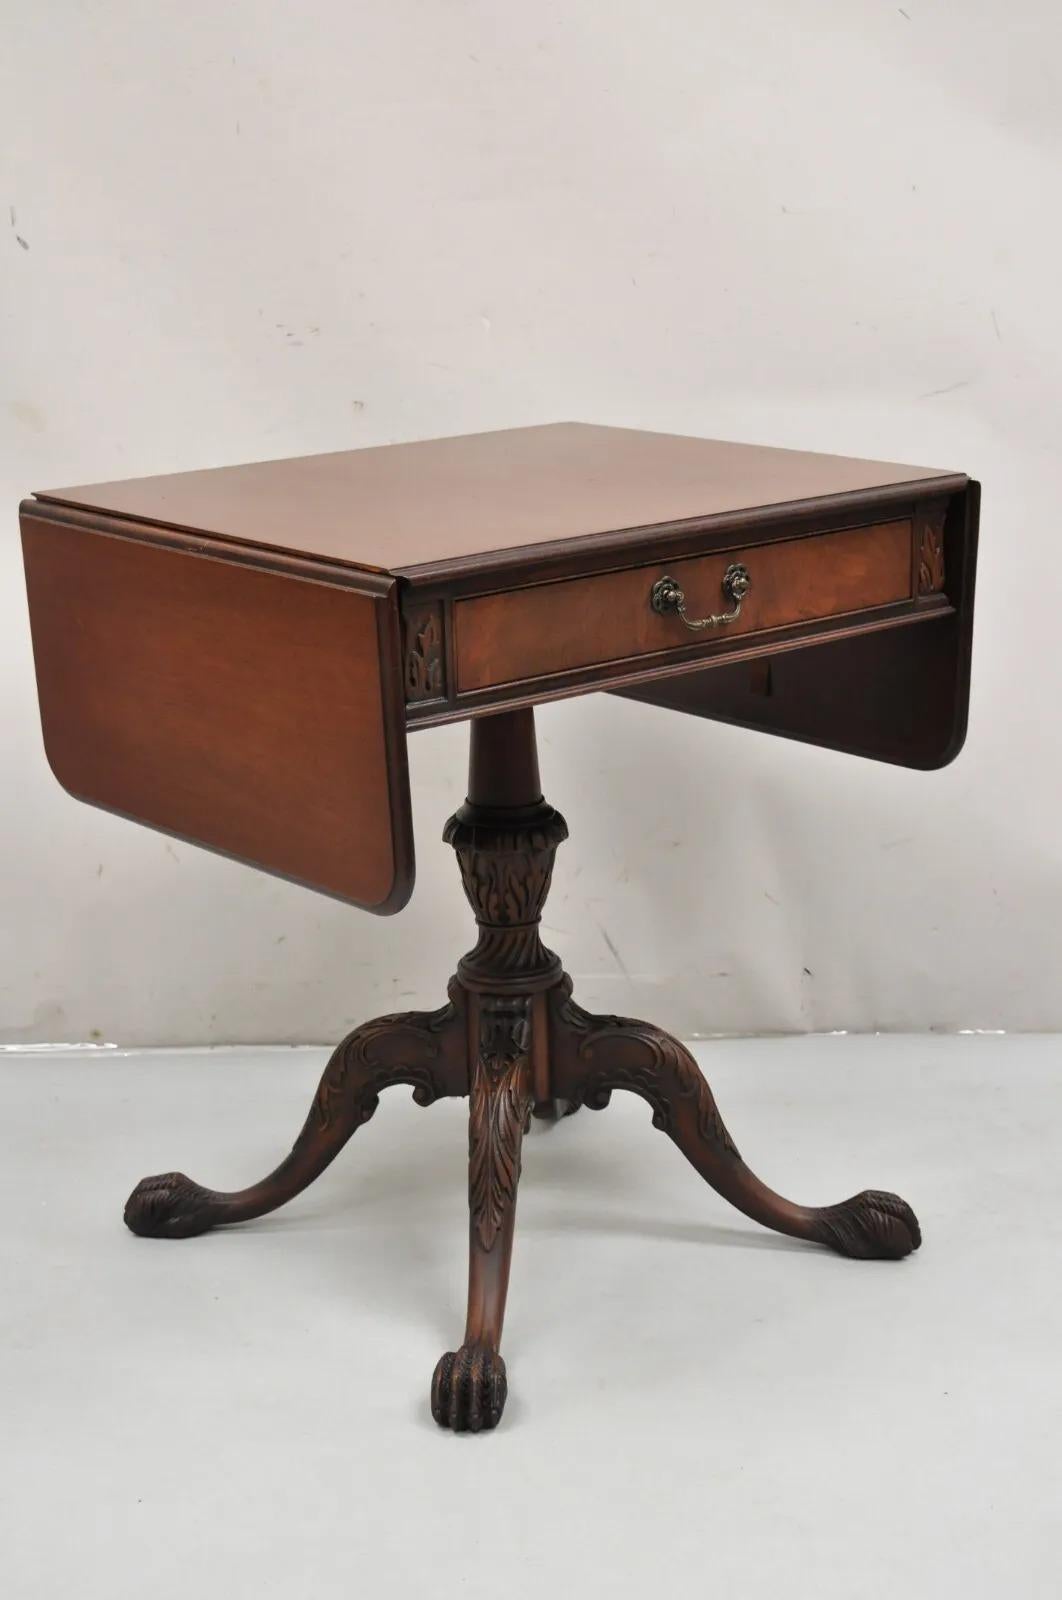 Chippendale Style Mahogany Carved Paw Feet Dropleaf Side Lamp Table by Imperial. Item features a single dovetailed drawer, remarkably carved pedestal and paw feet, original labels, very nice vintage table. Circa Early 20th Century.
Measurements: